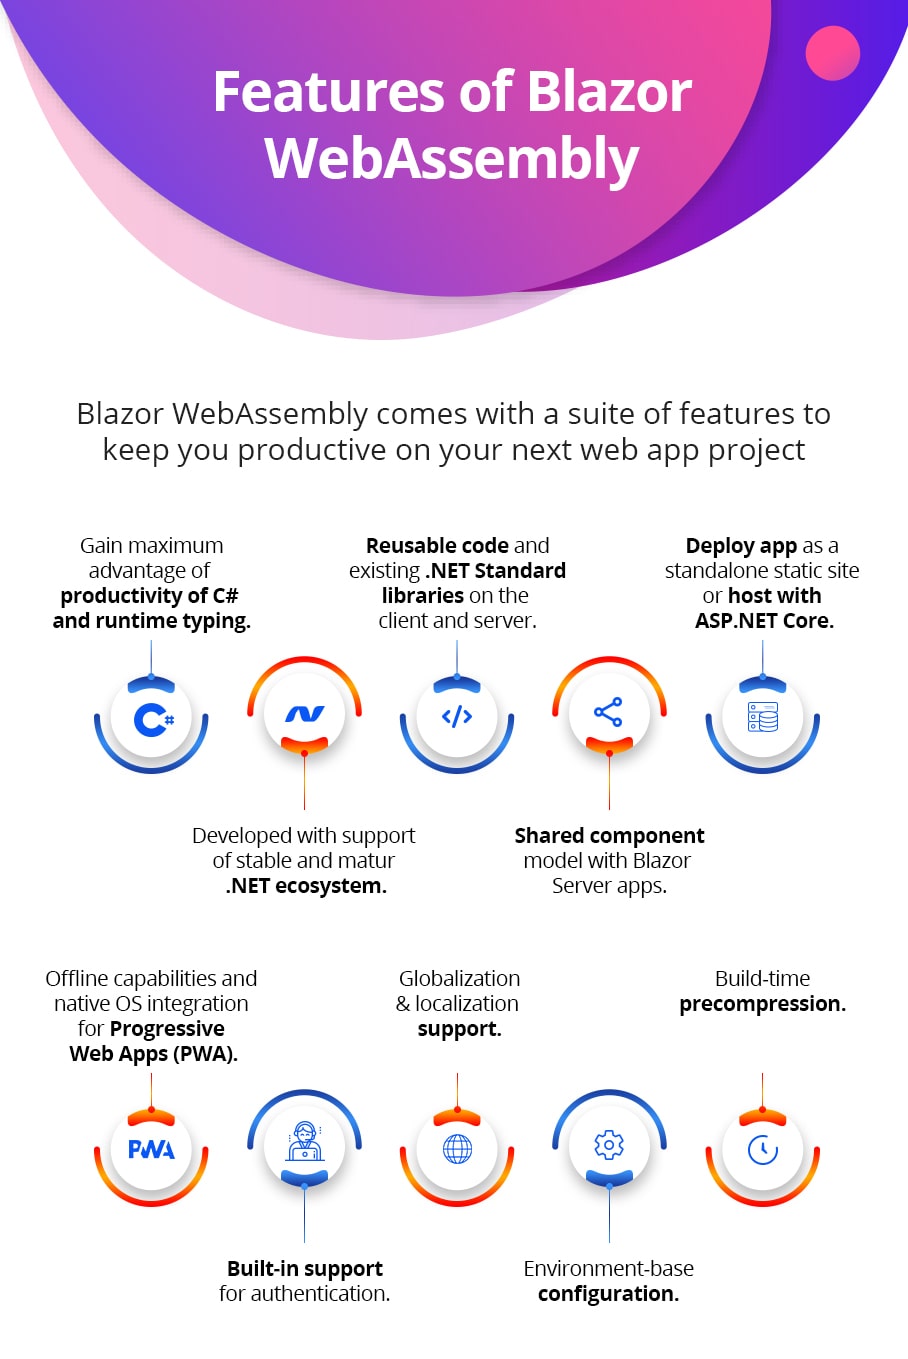 Features of Blazor WebAssembly